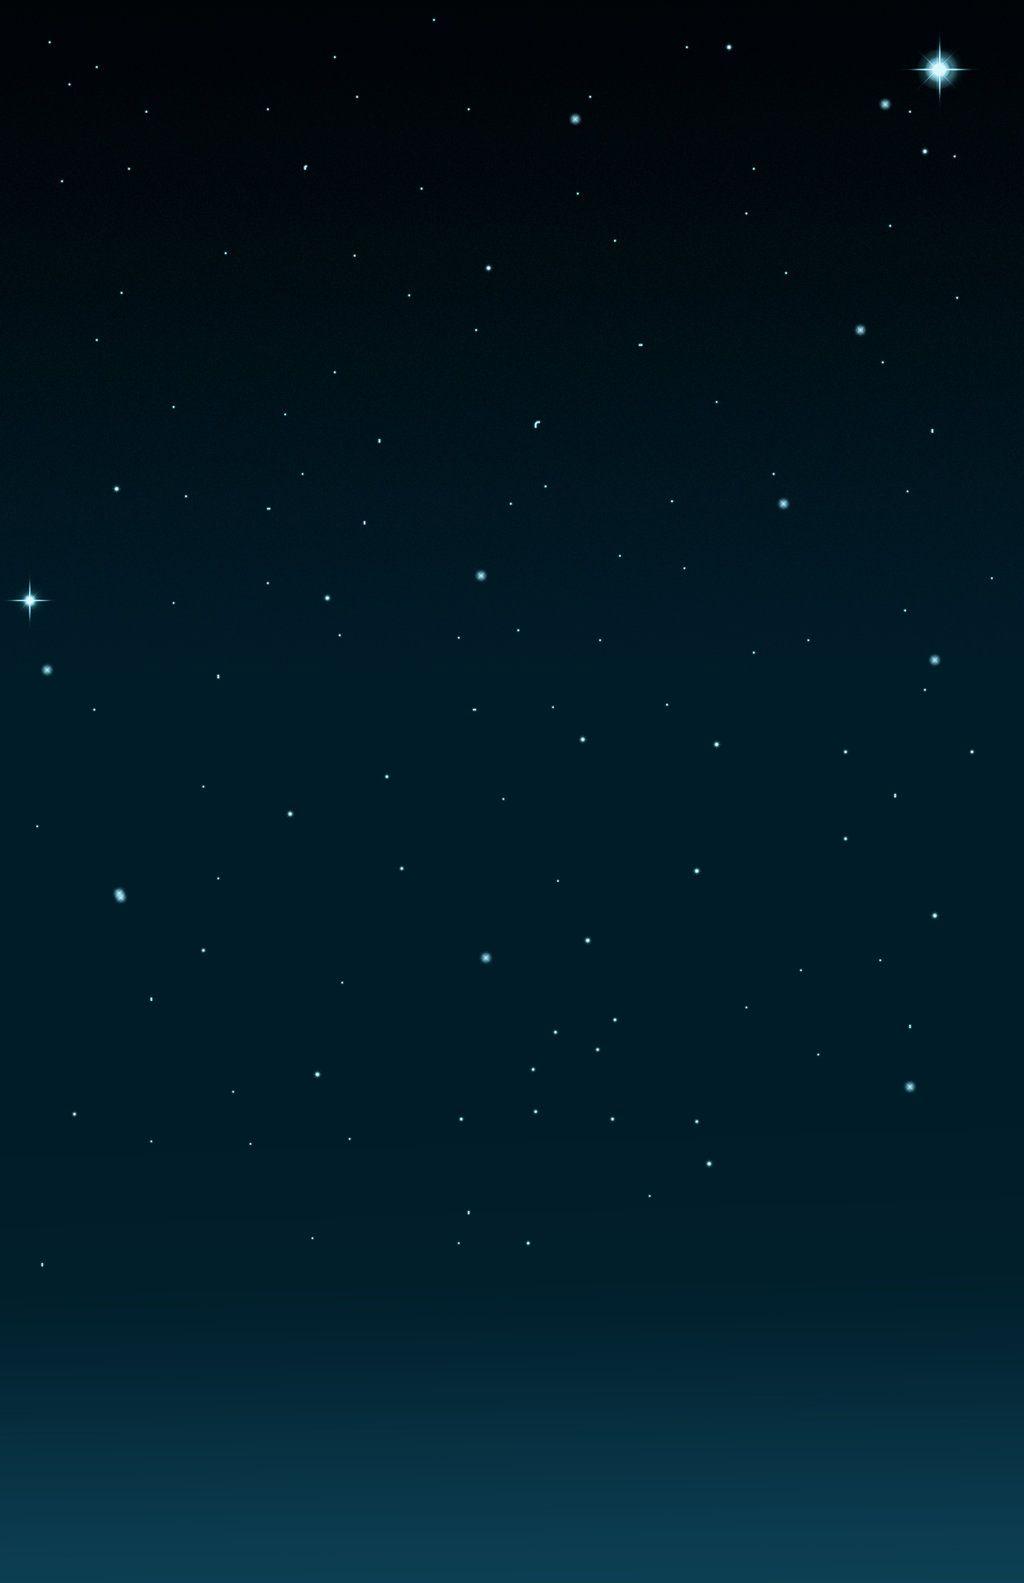 night sky background tumblr 1. Background Check All